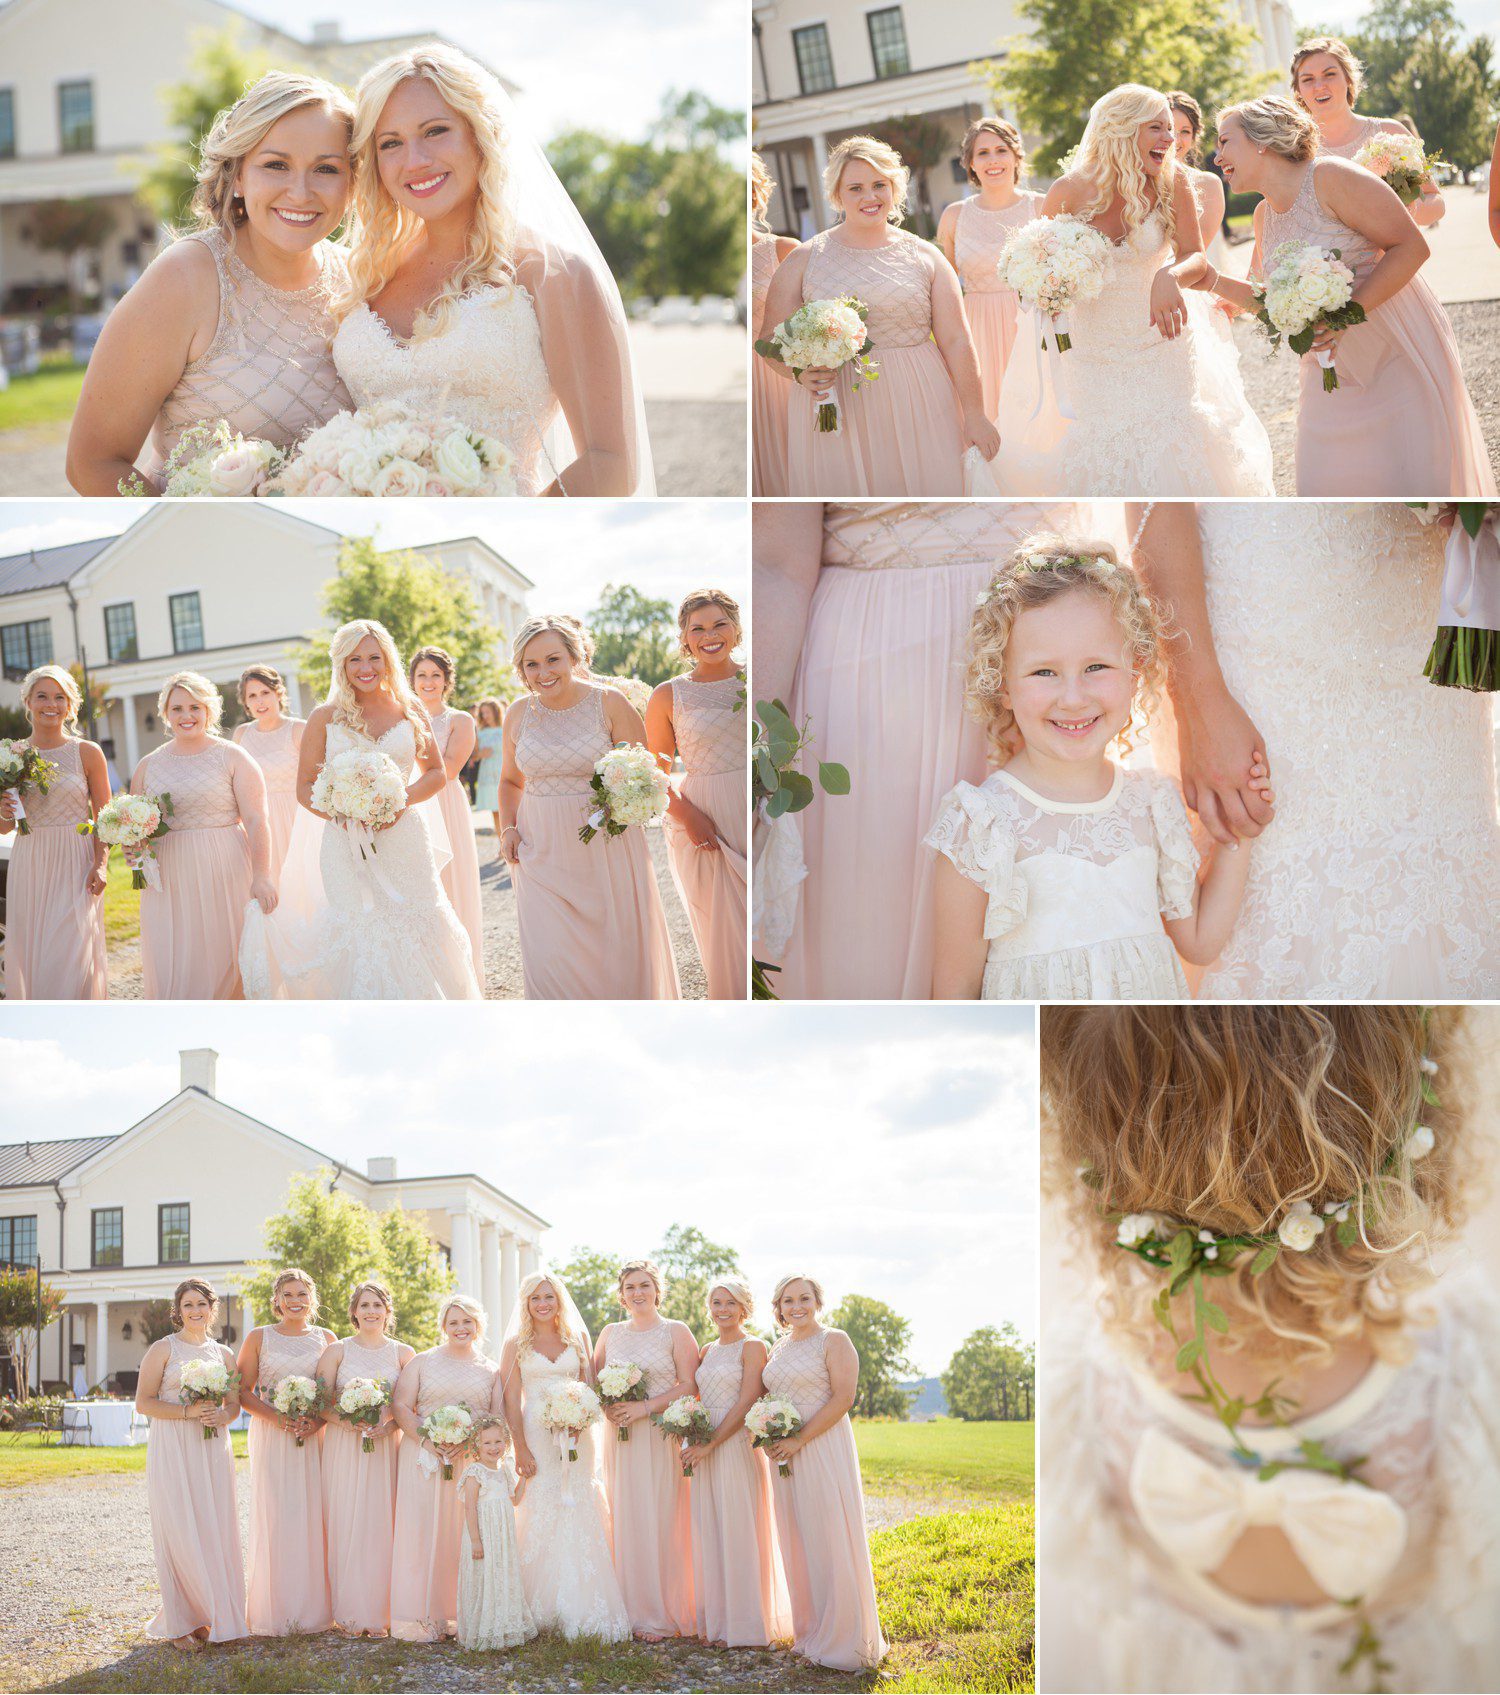 Bridesmaids and bride at Beautiful summer wedding at Foxland Harbor in Gallatin, TN overlooking Old Hickory Lake. Wedding photos by Krista Lee Photography